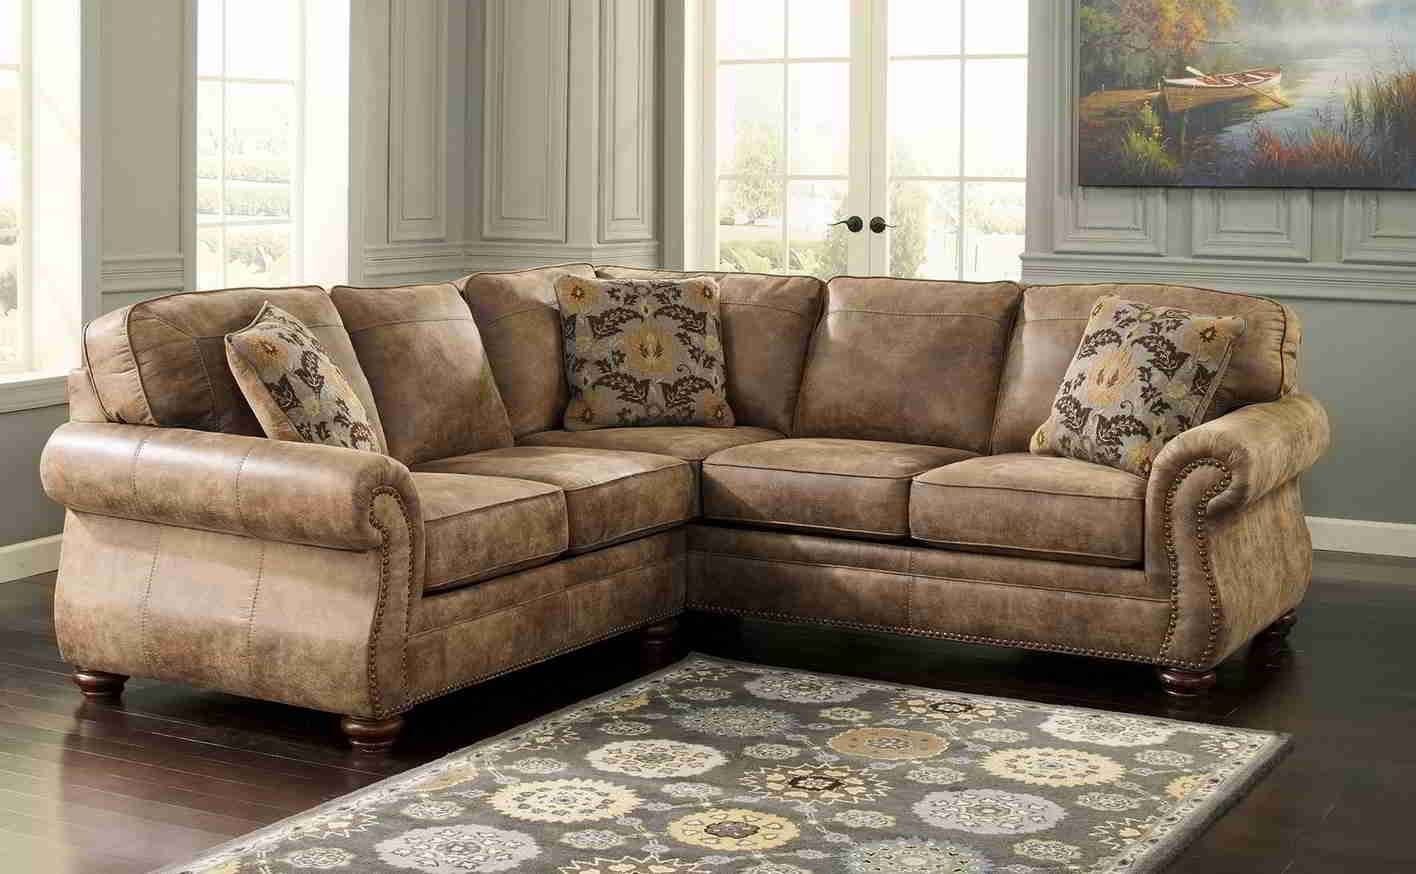 Wide Seat Sectional Sofas – Cleanupflorida Intended For Wide Seat Sectional Sofas (View 3 of 25)